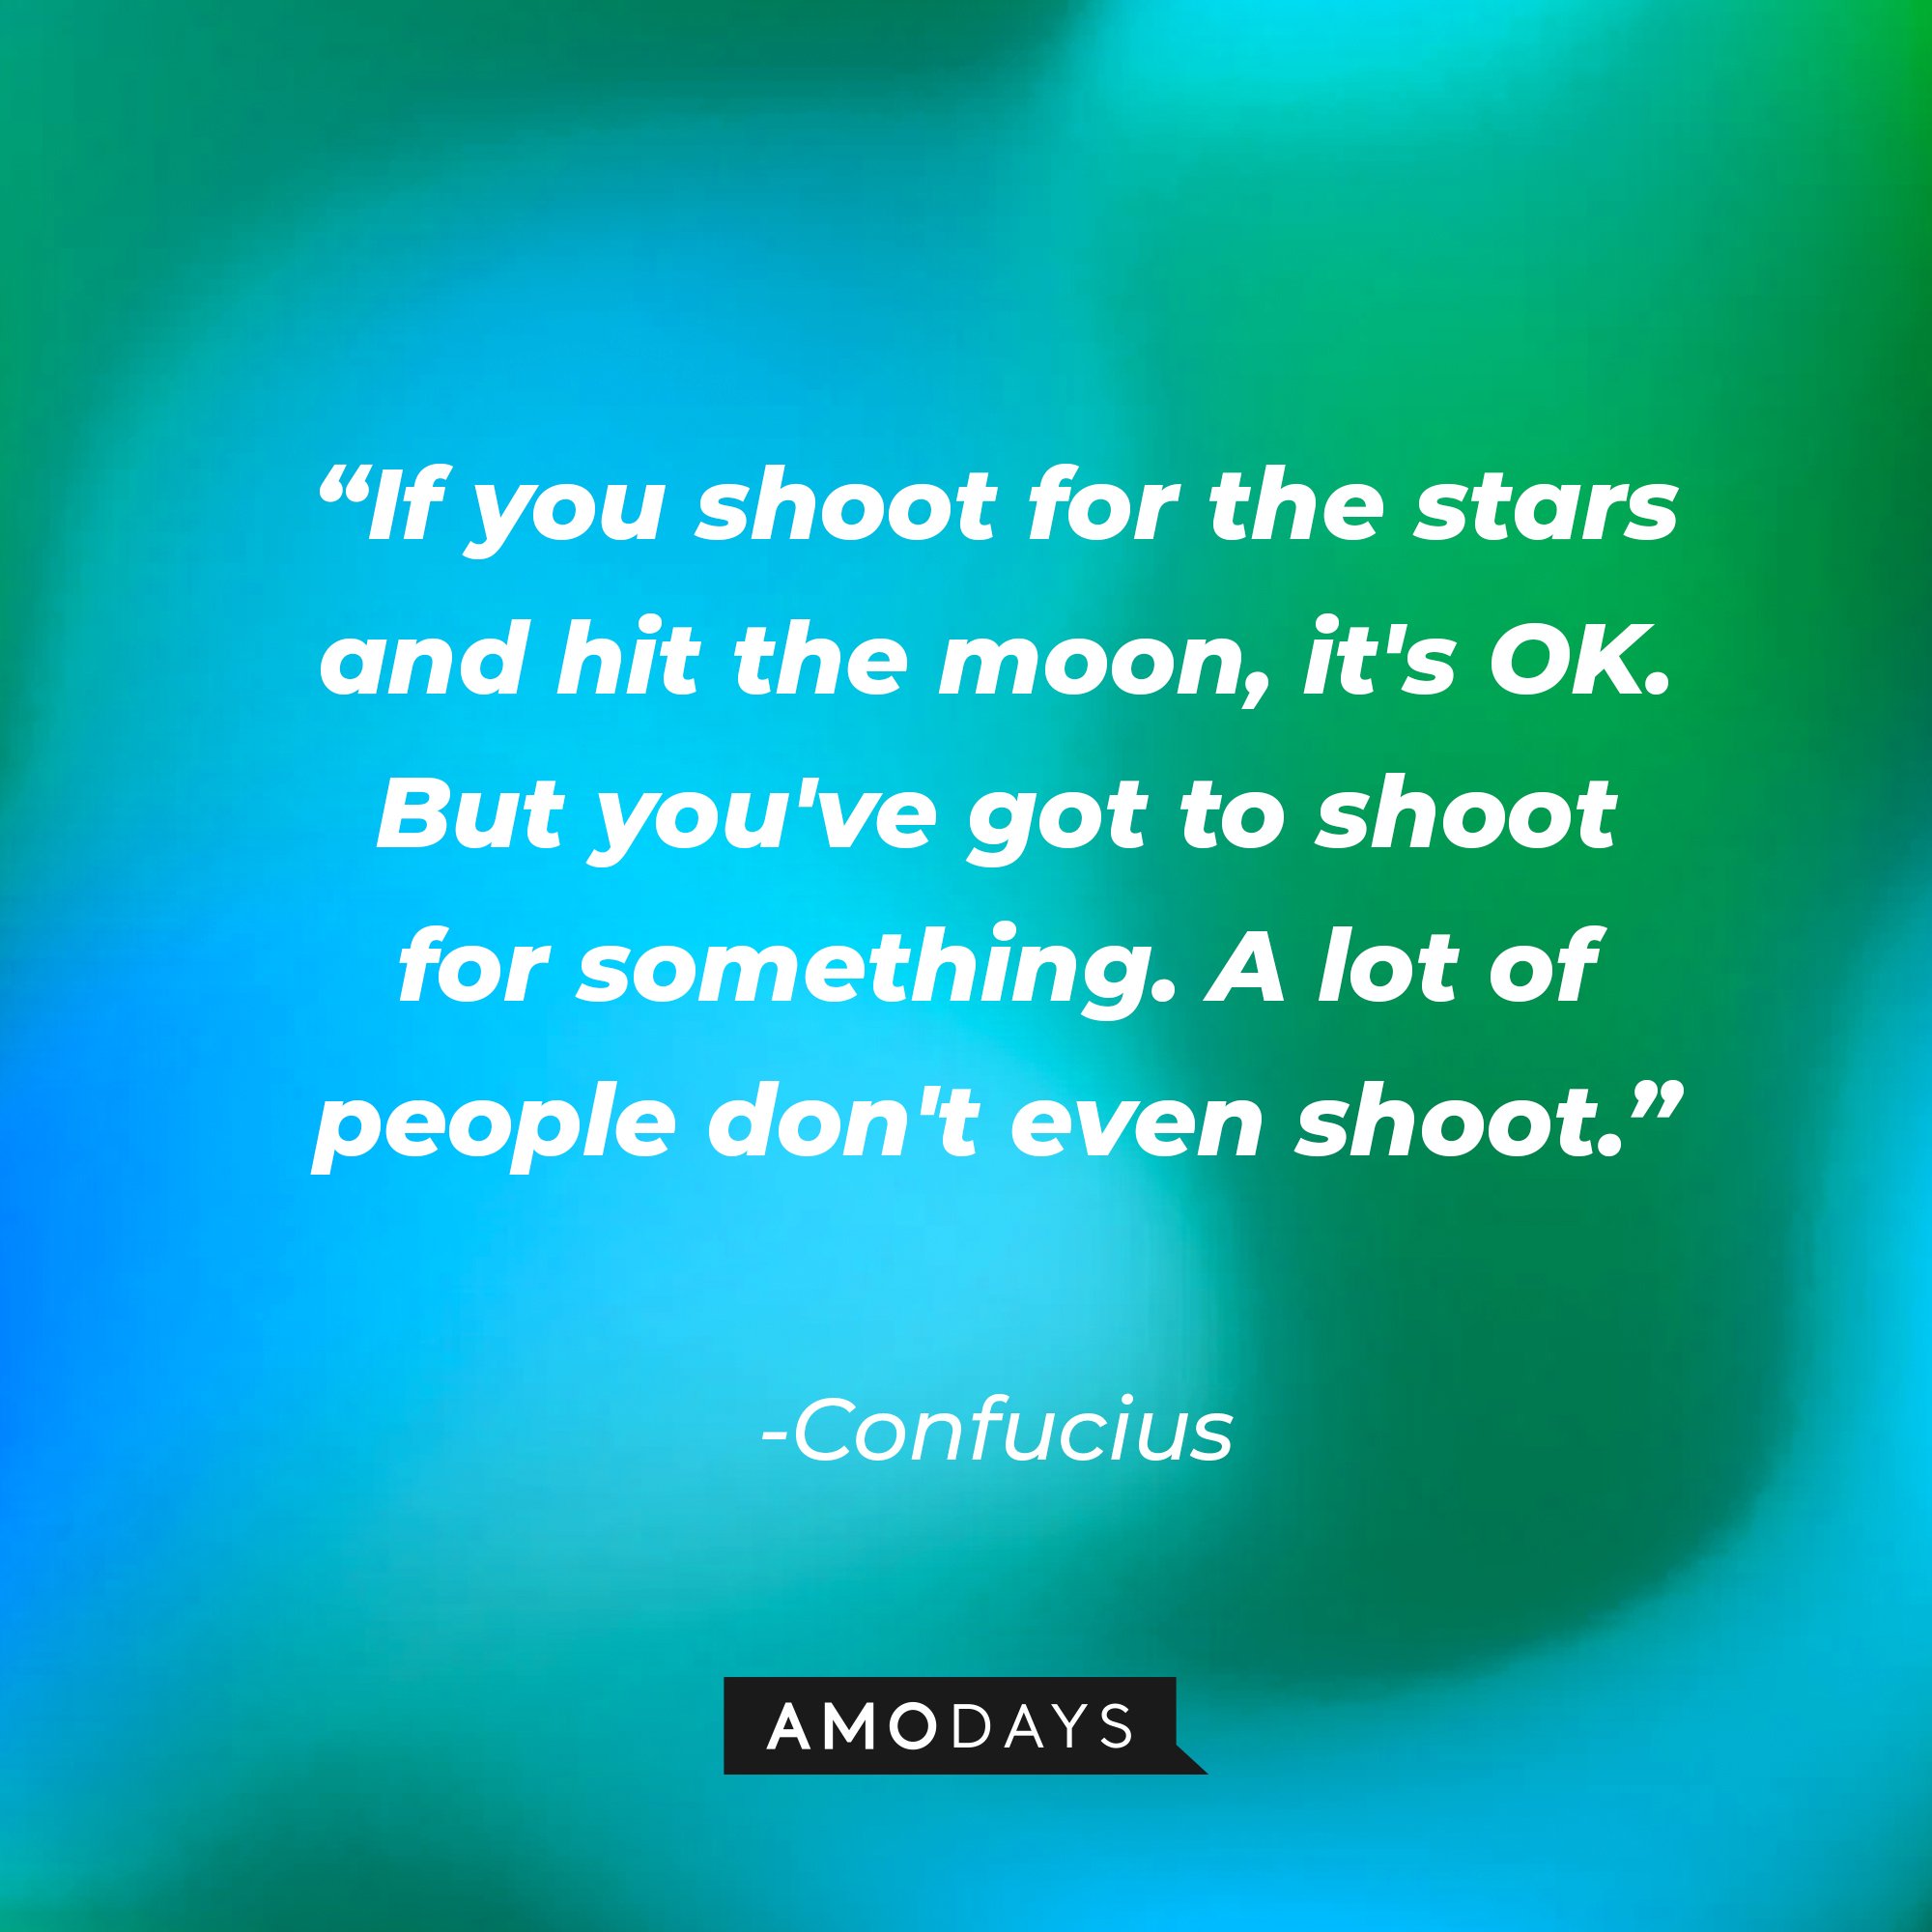 Confucius's quote: “If you shoot for the stars and hit the moon, it's OK. But you've got to shoot for something. A lot of people don't even shoot.” | Image: AmoDays